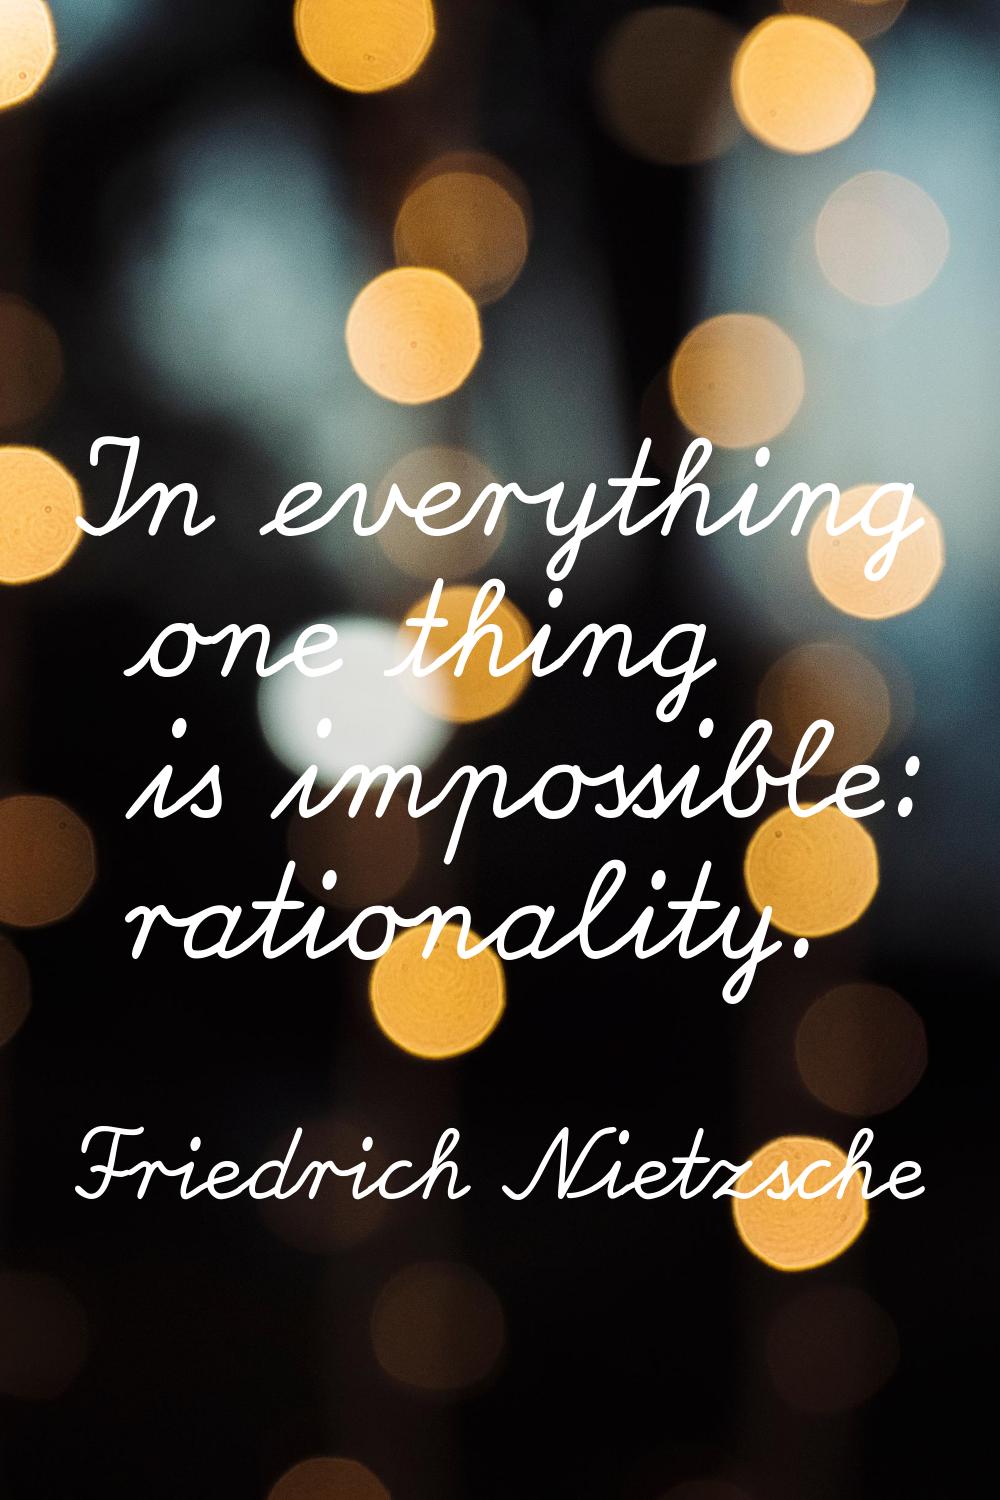 In everything one thing is impossible: rationality.